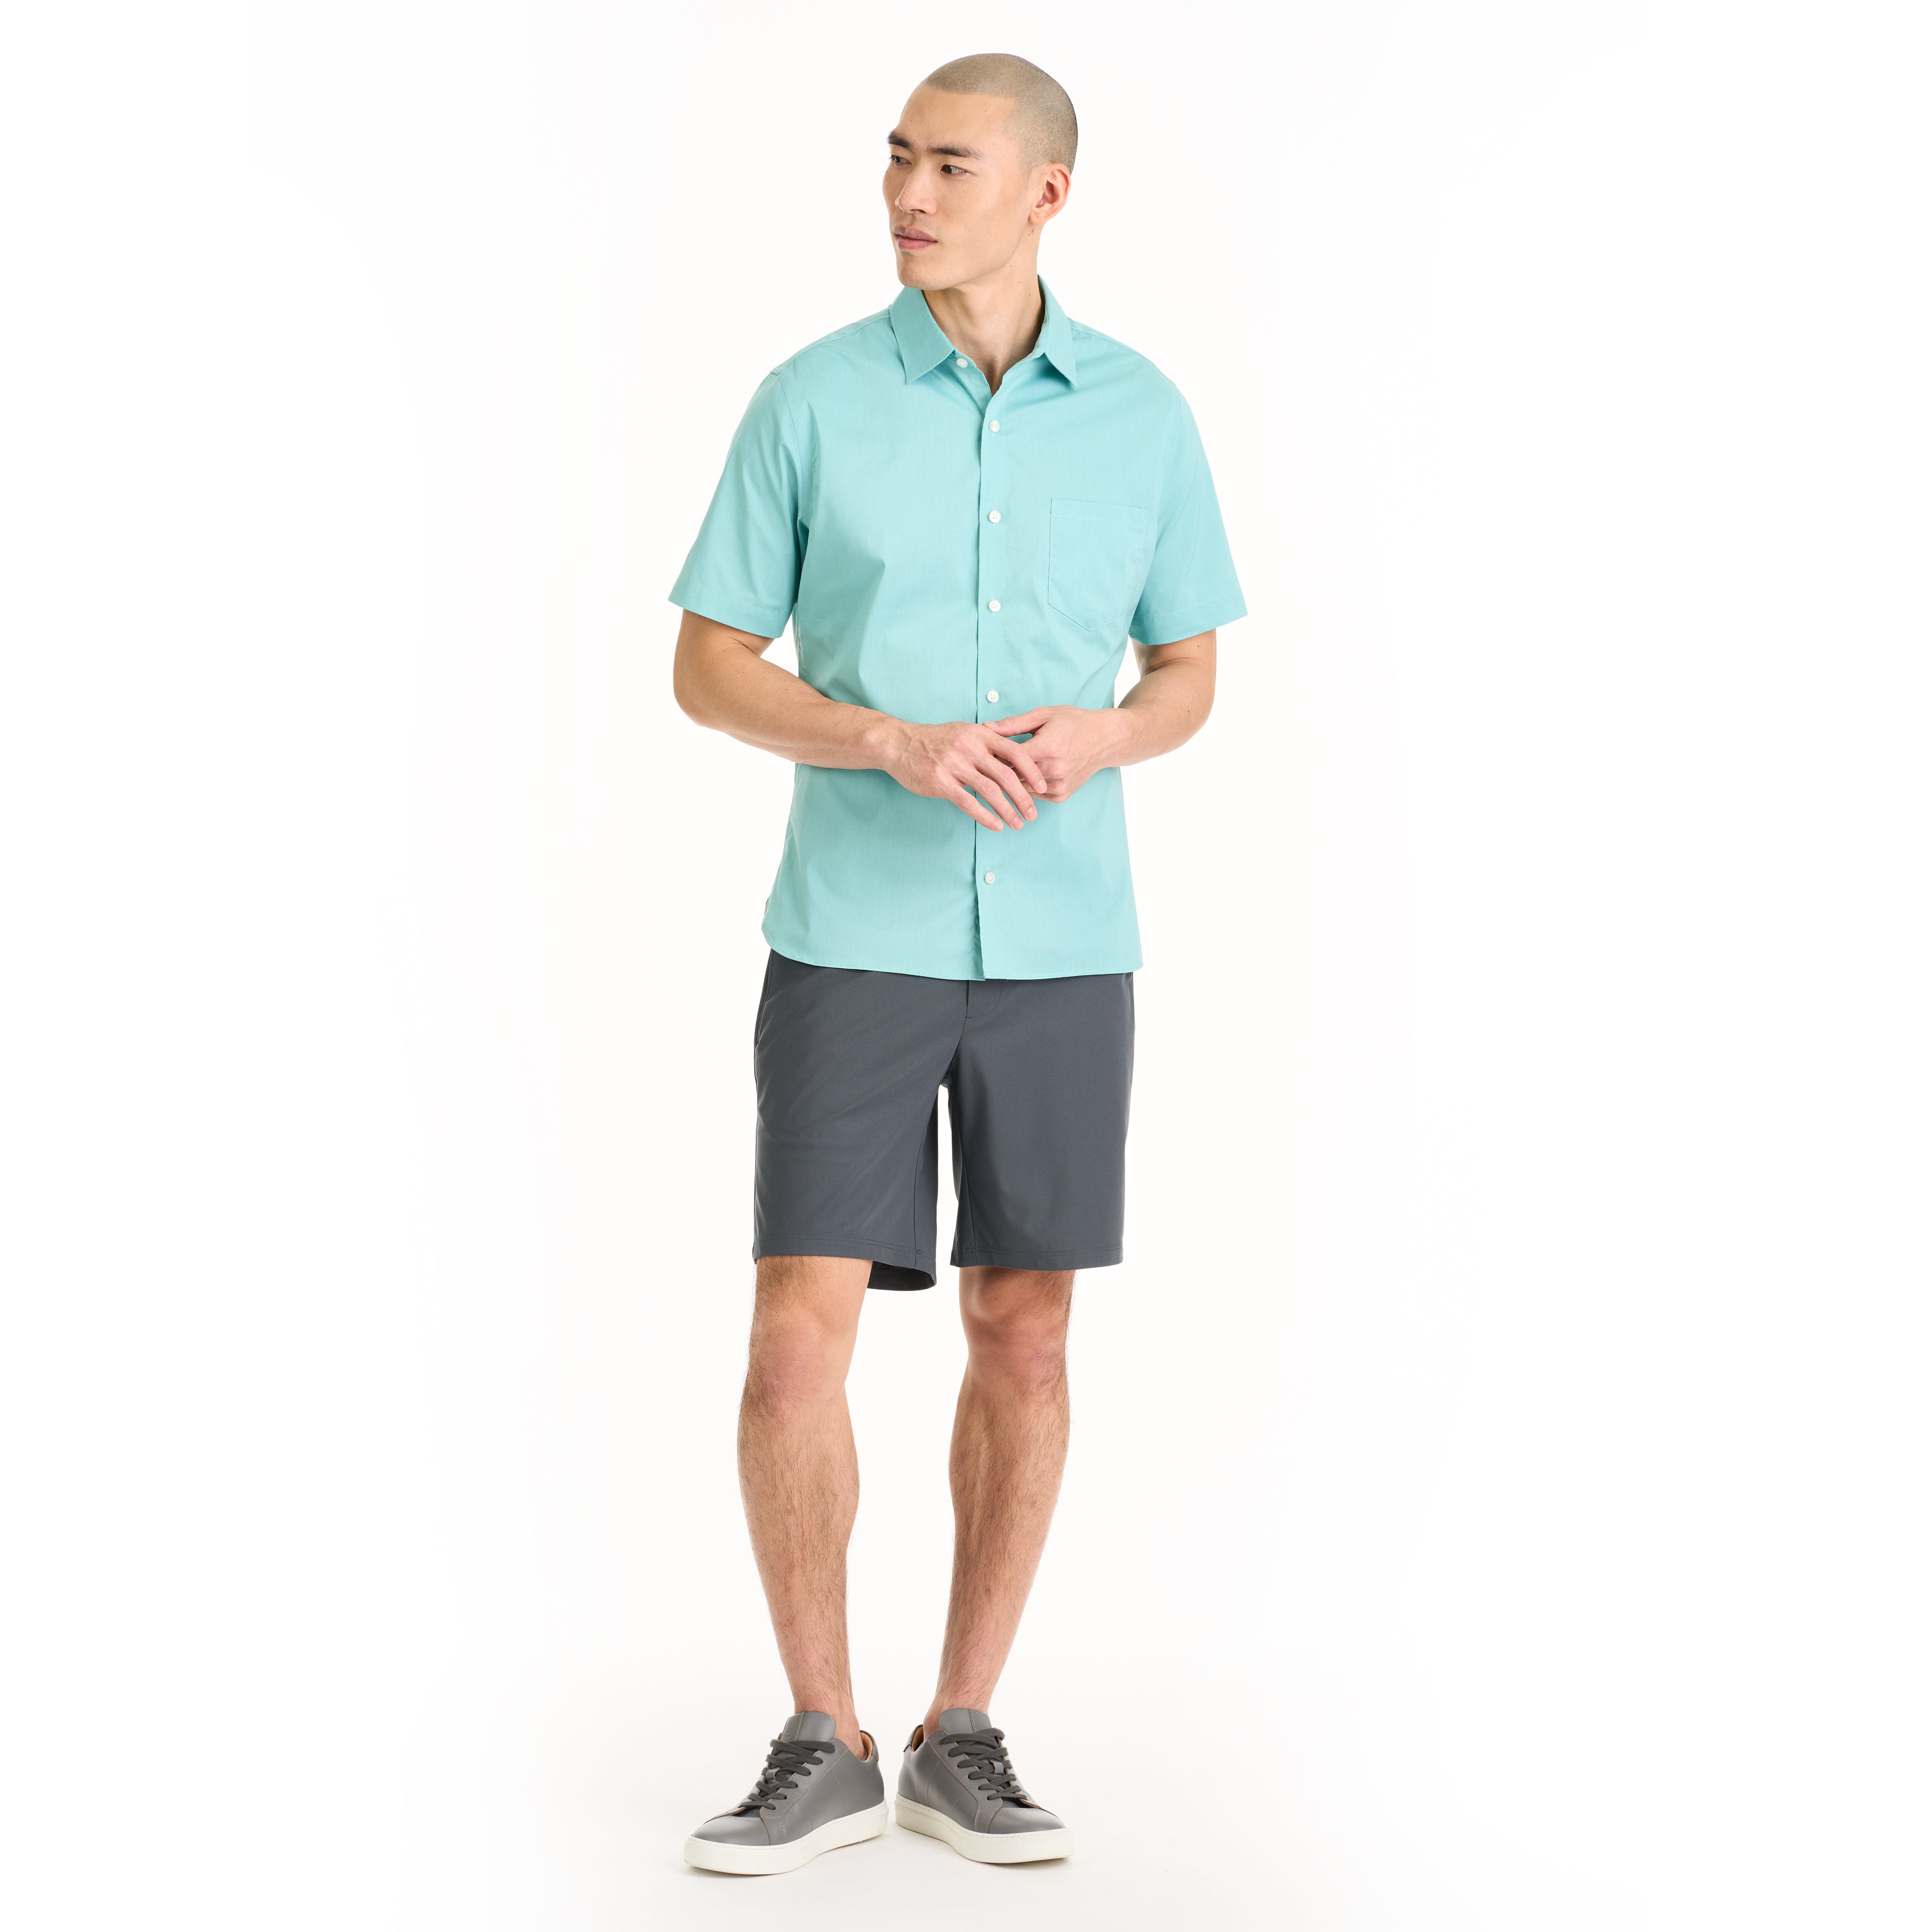 Essential Stain Shield Short Sleeve Shirt Solid - Slim Fit